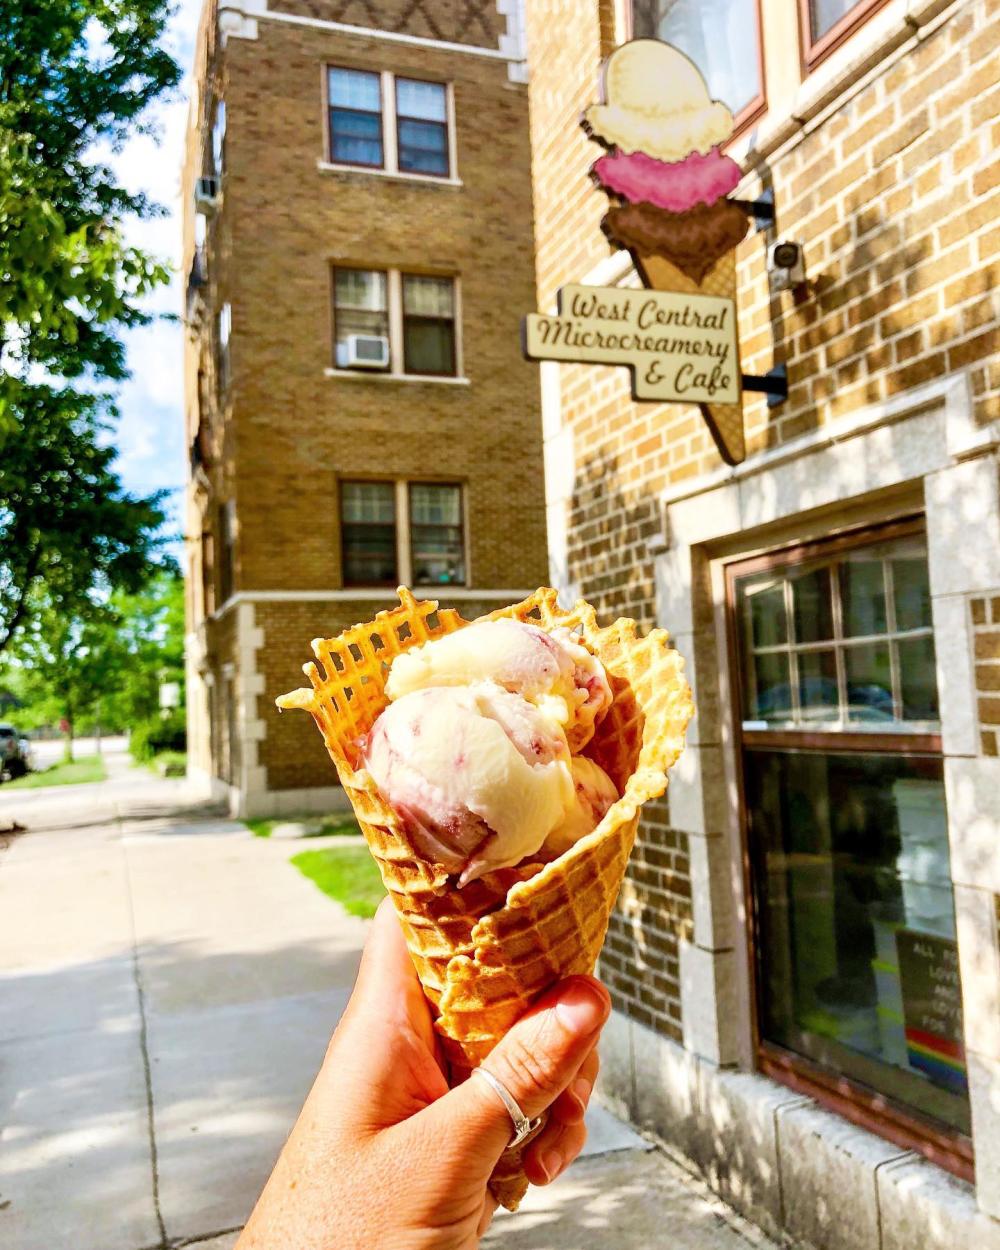 Ice cream waffle cone at West Central Microcreamery in Fort Wayne